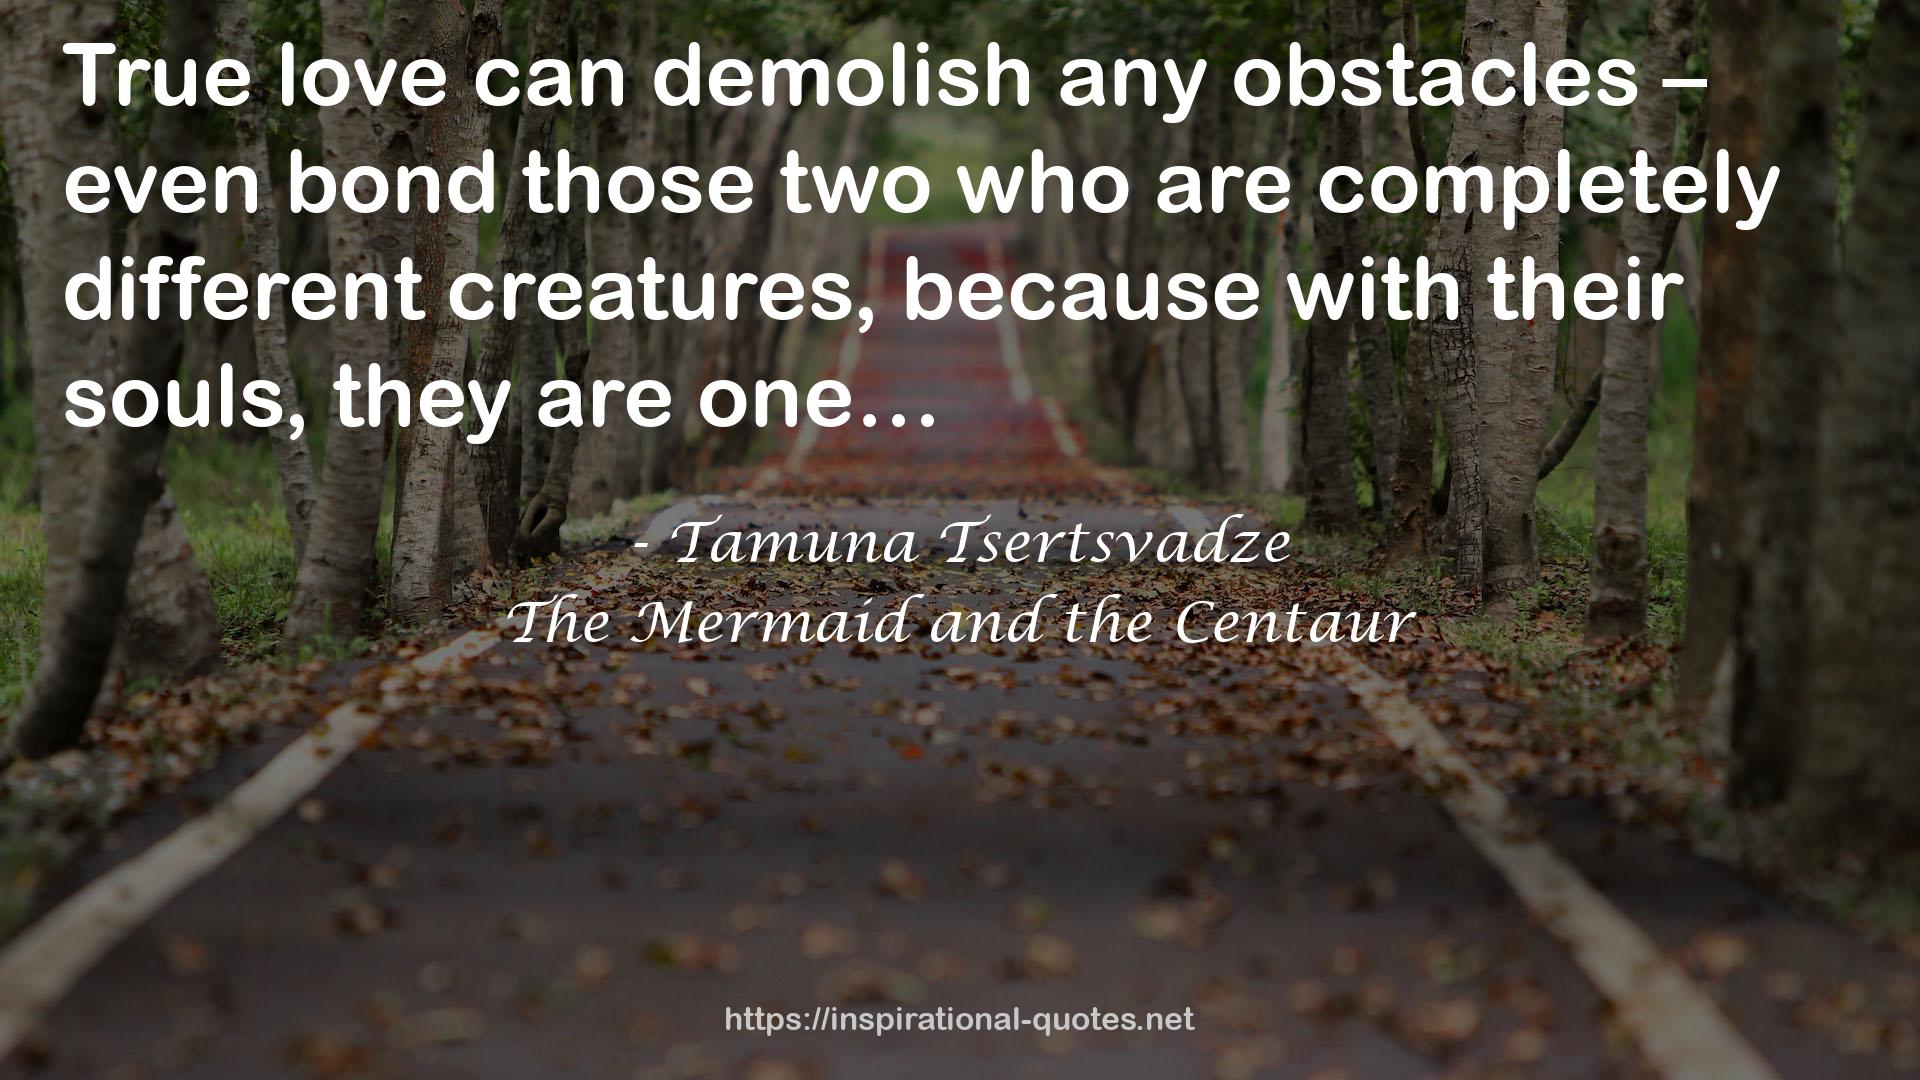 The Mermaid and the Centaur QUOTES